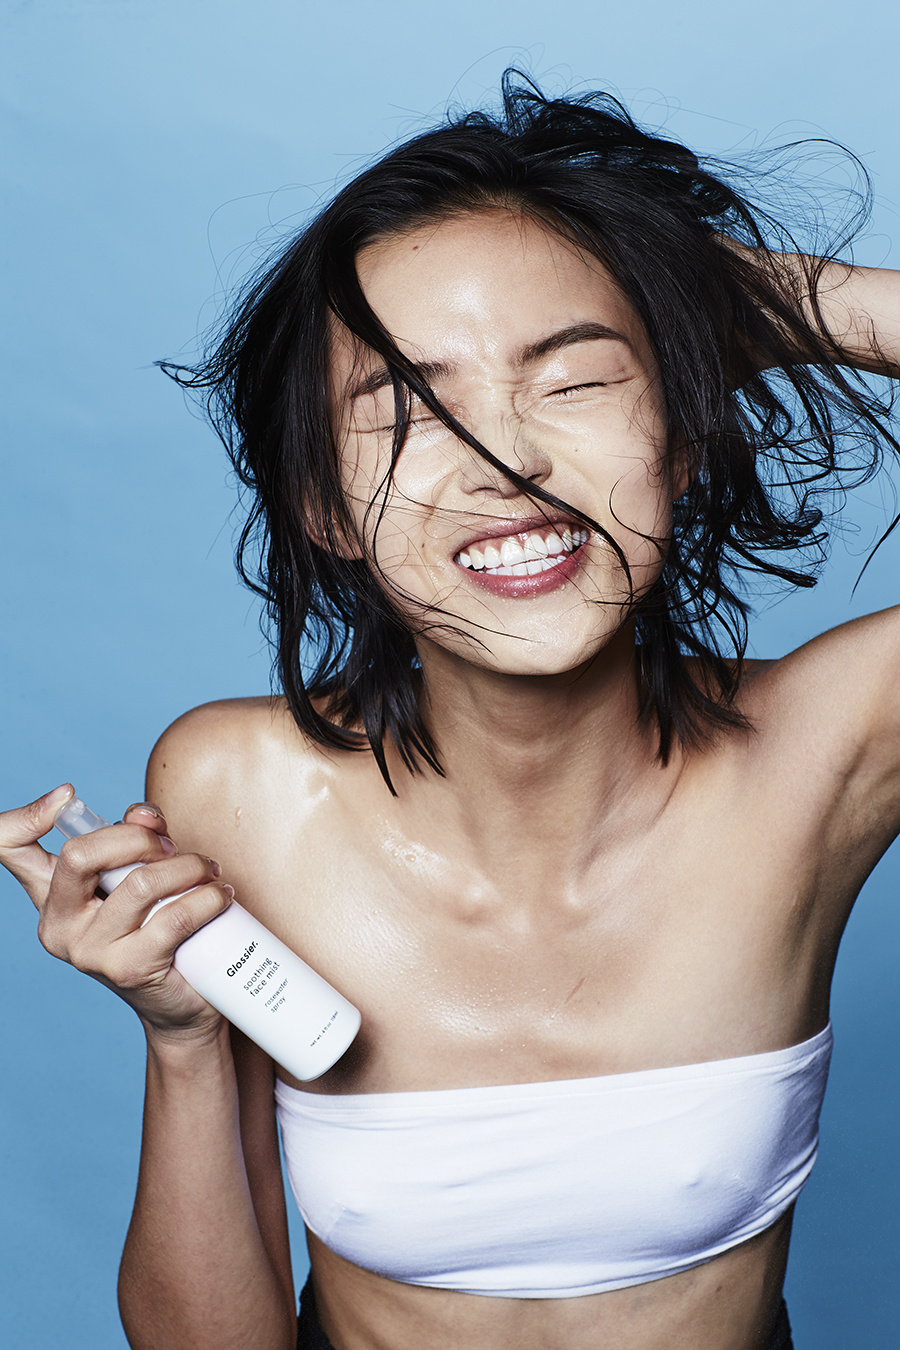 Glossier’s #SkinIsIn Trend is One to Celebrate